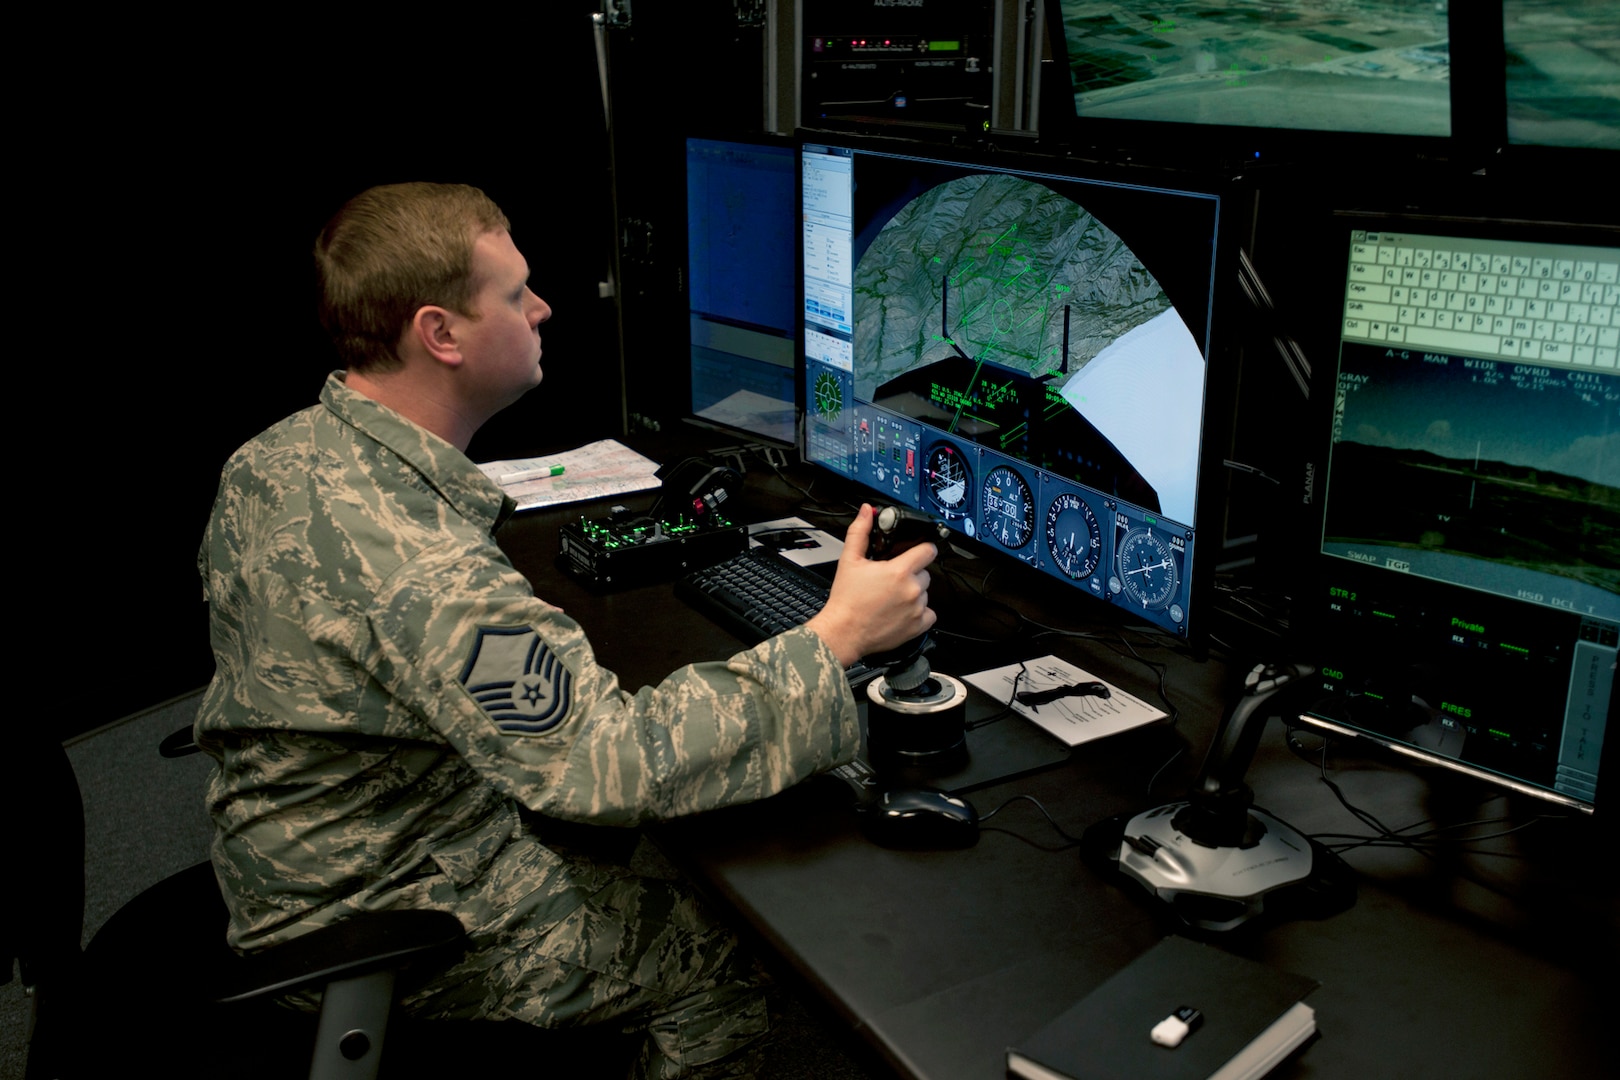 A member of the 146th Air Support Operations Squadron (ASOS), participates in training utilizing the Air National Guard Advanced Joint Terminal Attack Controller Training System (AAJTS) during an unveiling of the first operational AAJTS in the nation at Will Rogers Air National Guard Base in Oklahoma City. The AAJTS is a high-fidelity, fully immersive, simulator designed to support Air National Guard (ANG) Joint Terminal Attack Controller (JTAC) and Combat Controller squadron level continuation, qualification and mission rehearsal training.